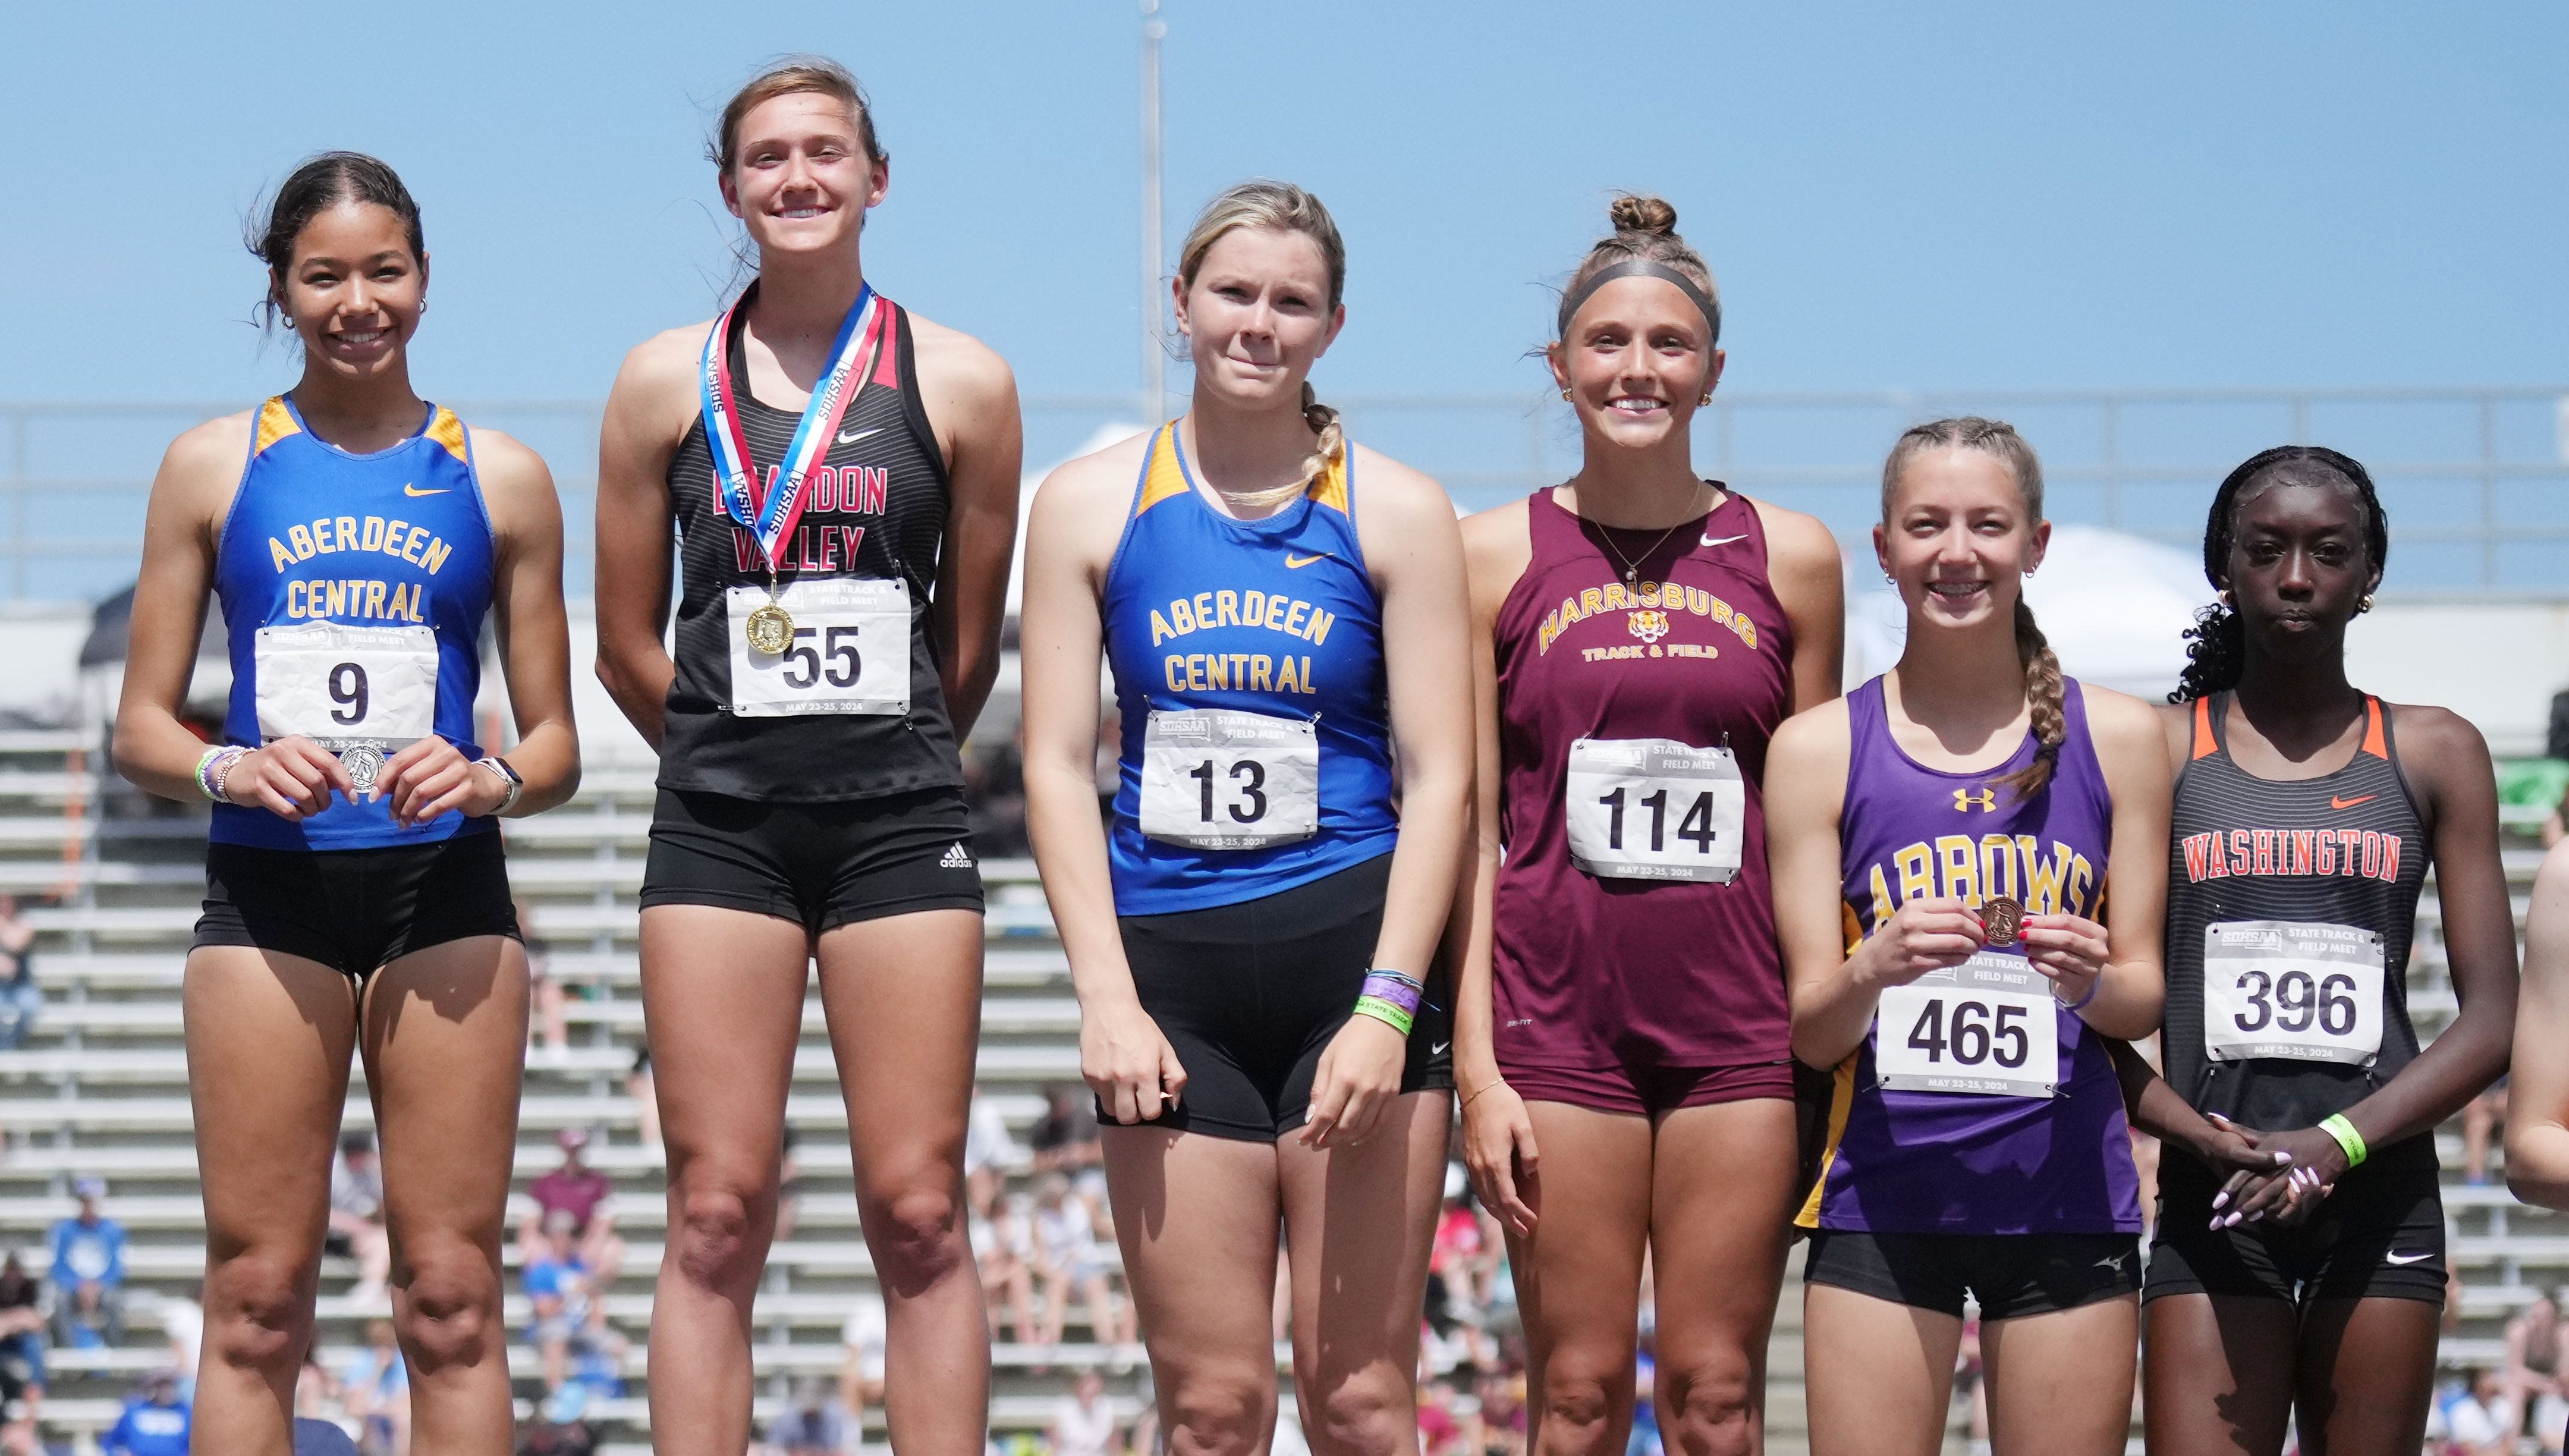 Deubrook Area's boys and girls lead the way by sweeping the Class B 3,200-meter relays